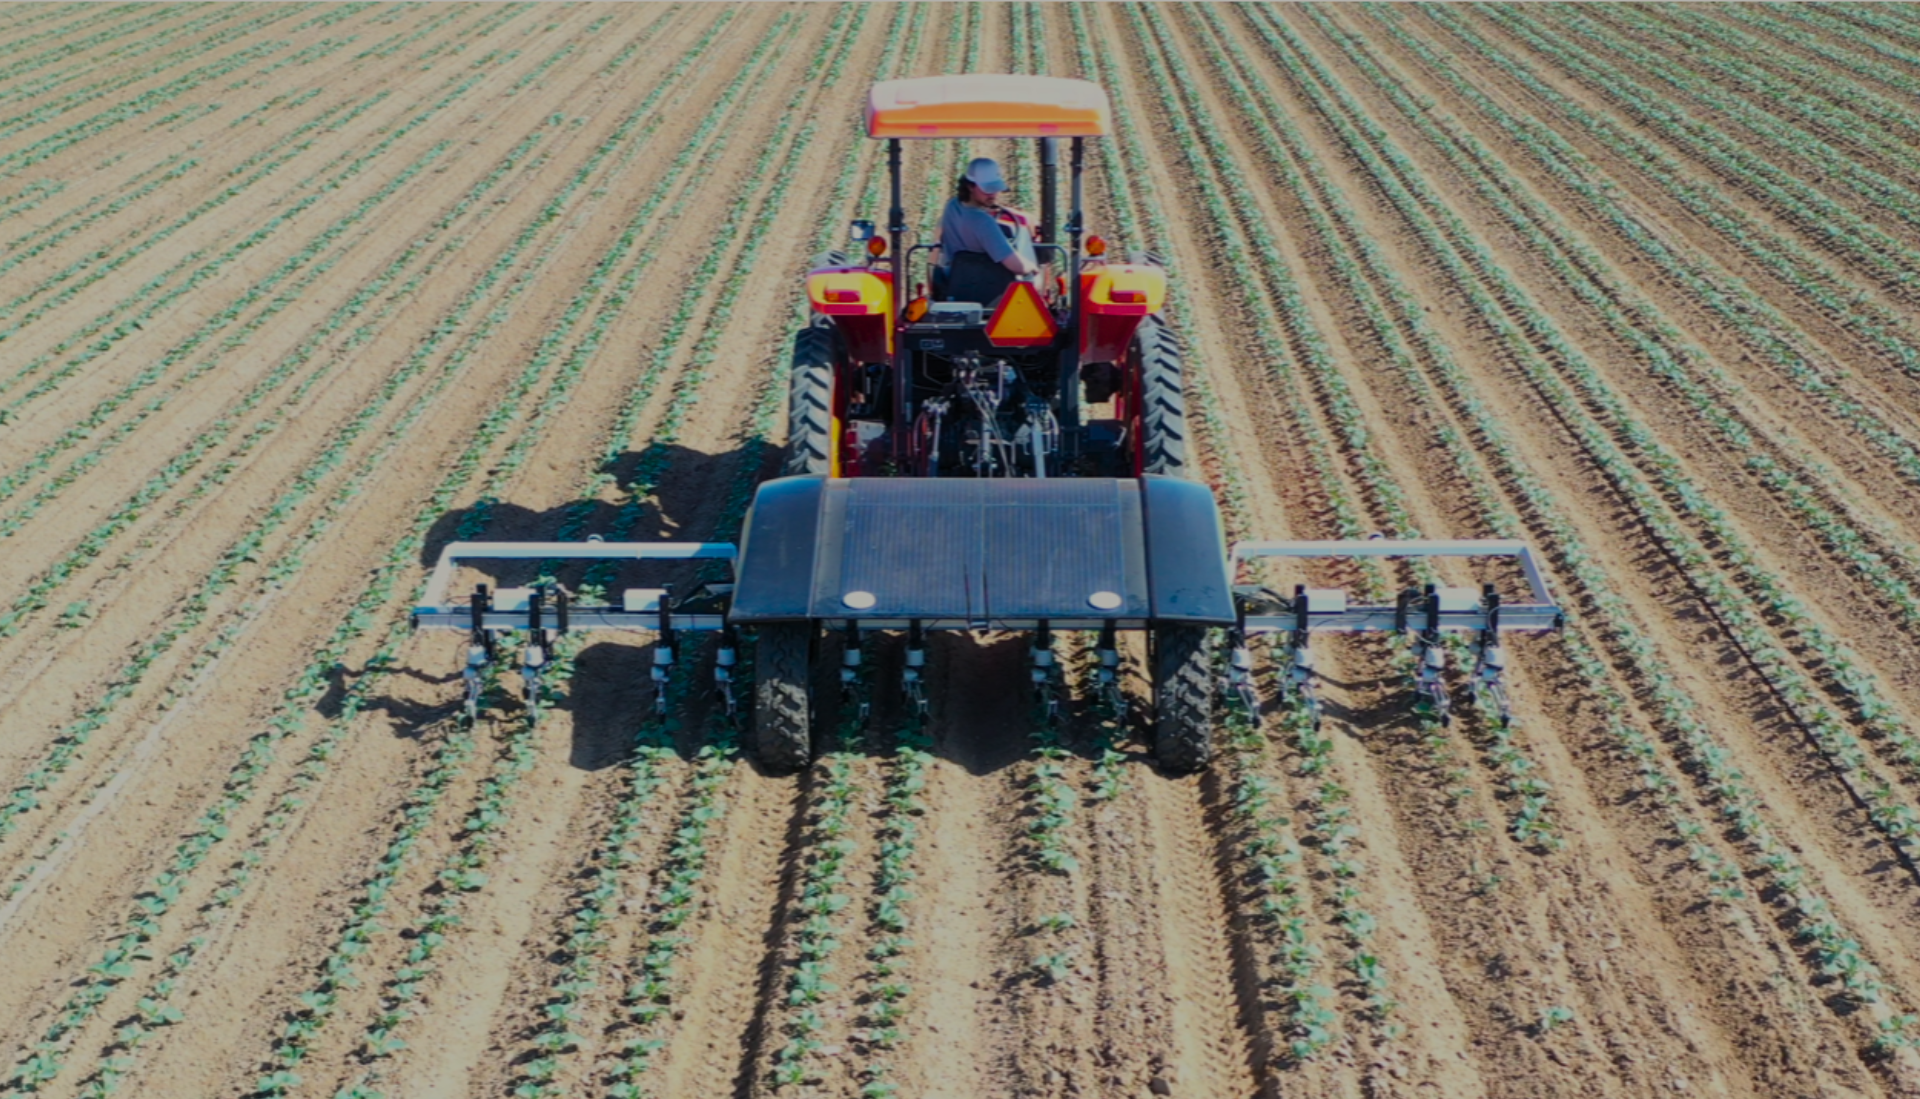 The WeedSpider Tractor Platform attached to an orange strawberry tractor in crop field robotically weeding the rows of plants.